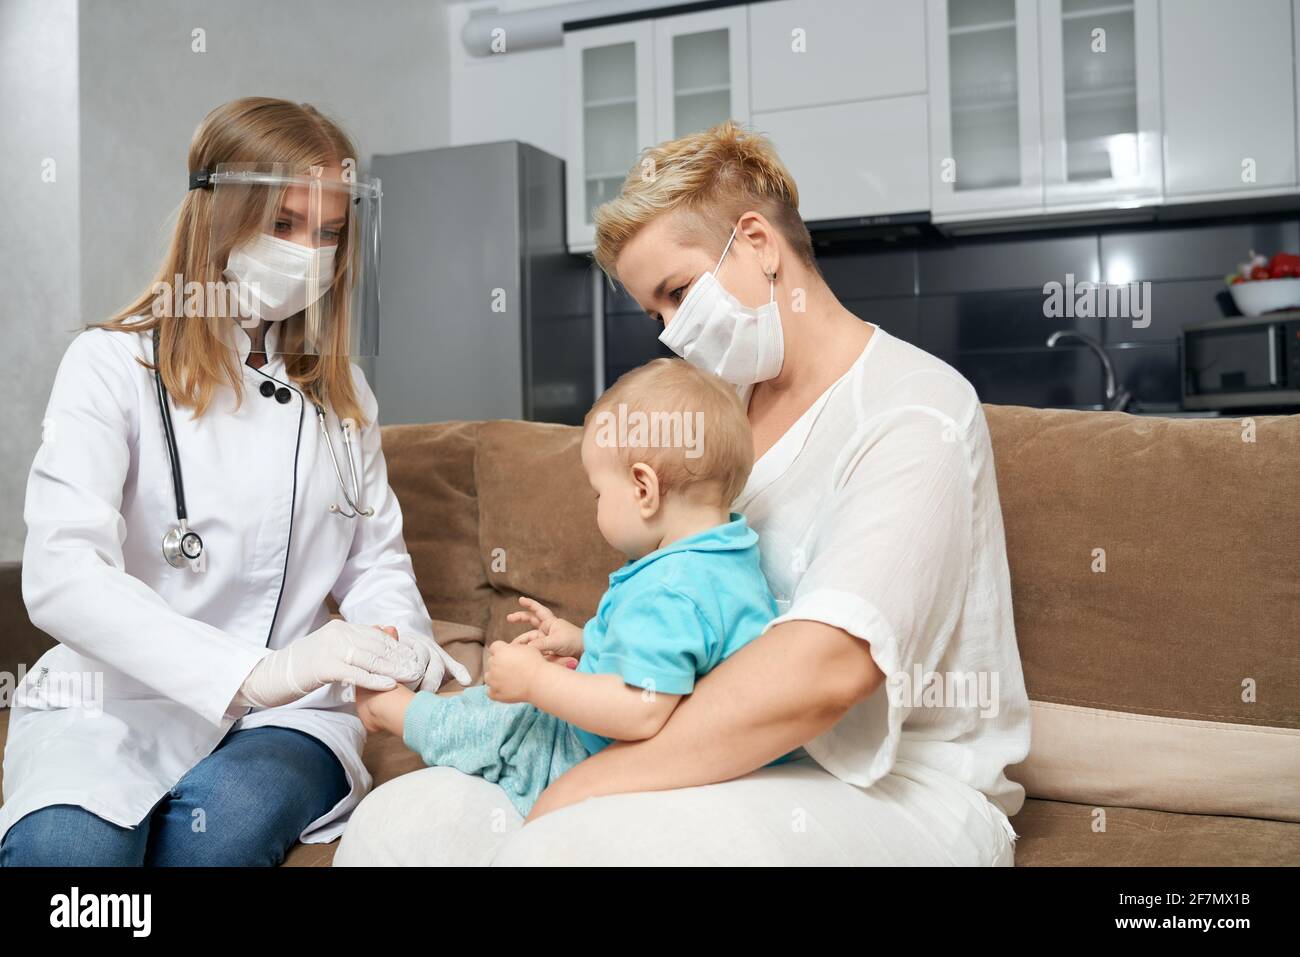 Professional doctor in medical uniform and mask checking health condition of little baby. Young mother holding boy on knees during medical examination. Stock Photo